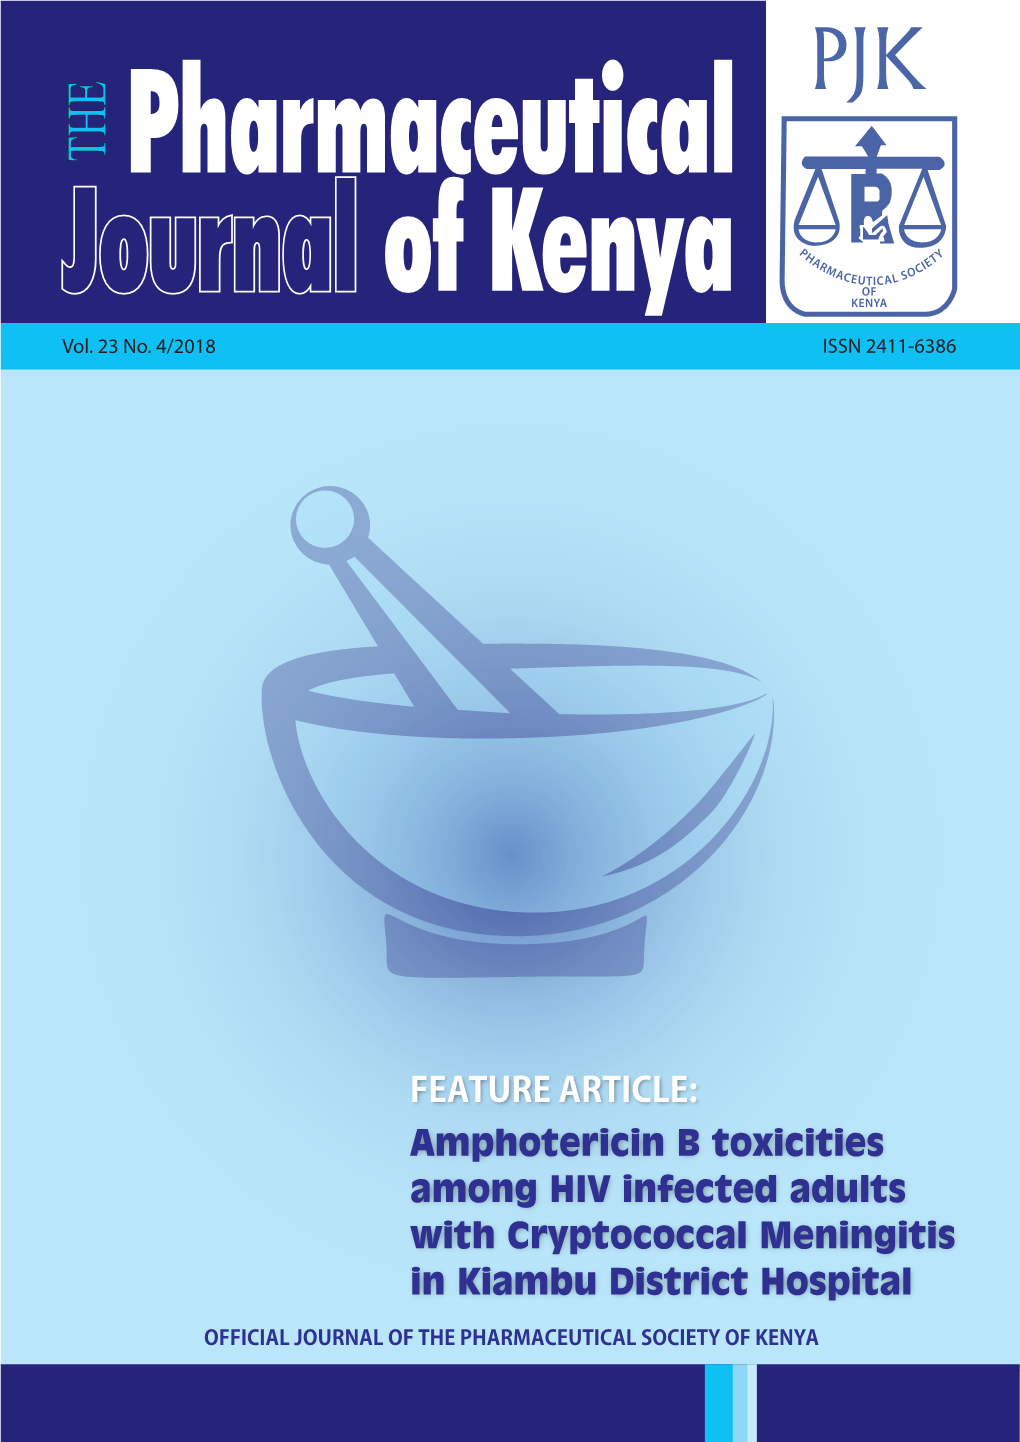 Amphotericin B Toxicities Among HIV Infected Adults with Cryptococcal Meningitis in Kiambu District Hospital